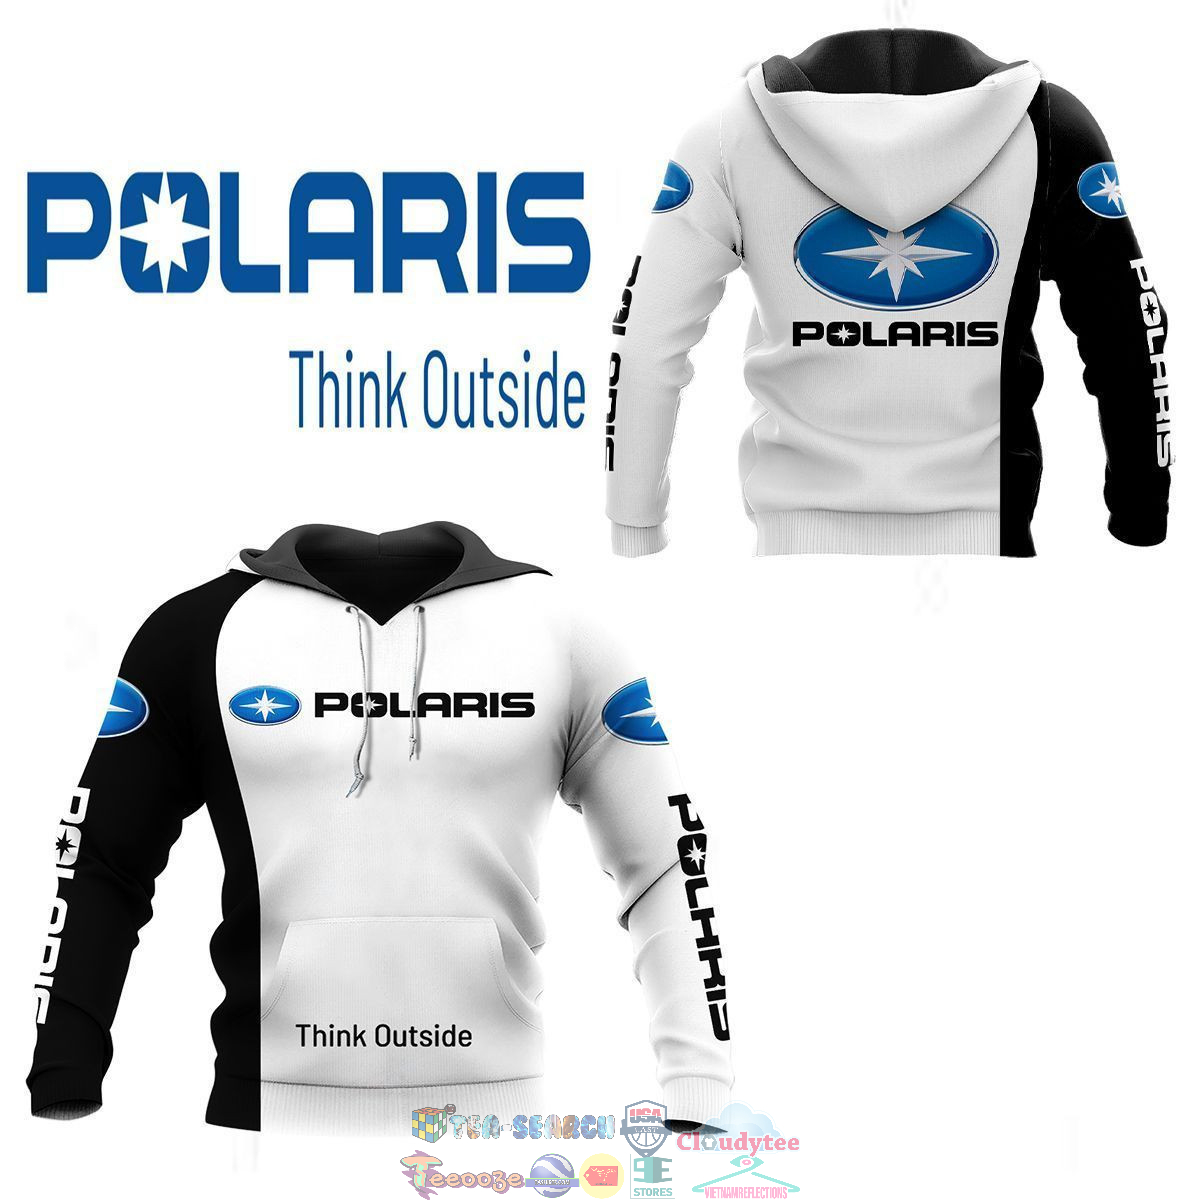 Polaris Think Outside White 3D hoodie and t-shirt – Saleoff